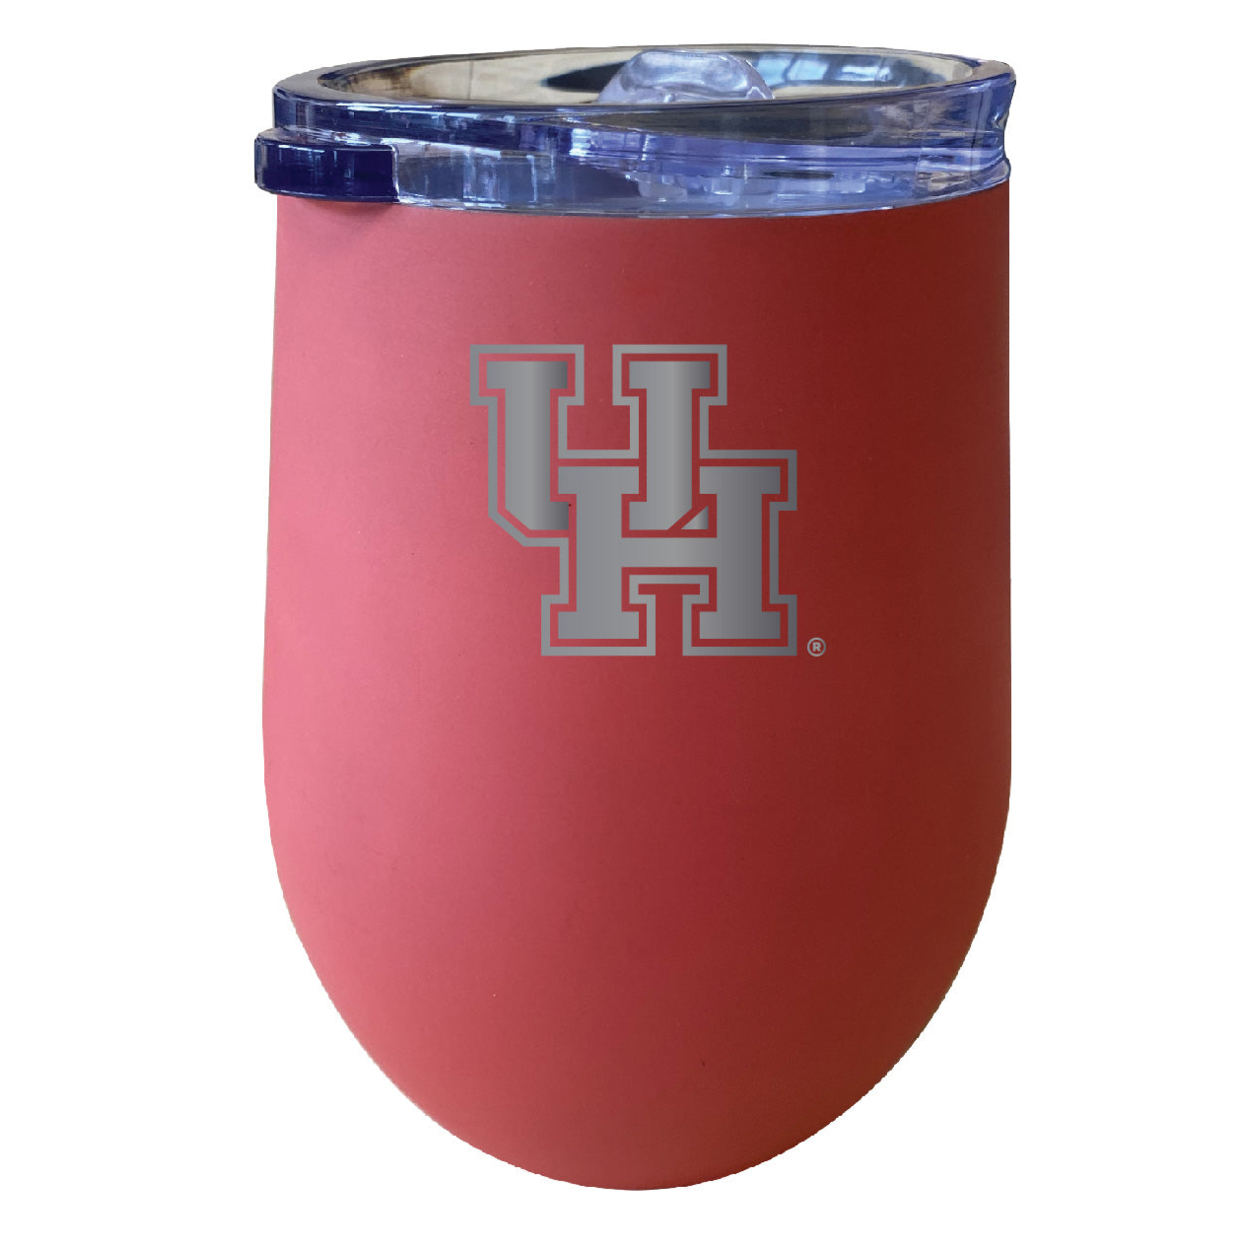 University Of Houston 12 Oz Etched Insulated Wine Stainless Steel Tumbler - Choose Your Color - Coral